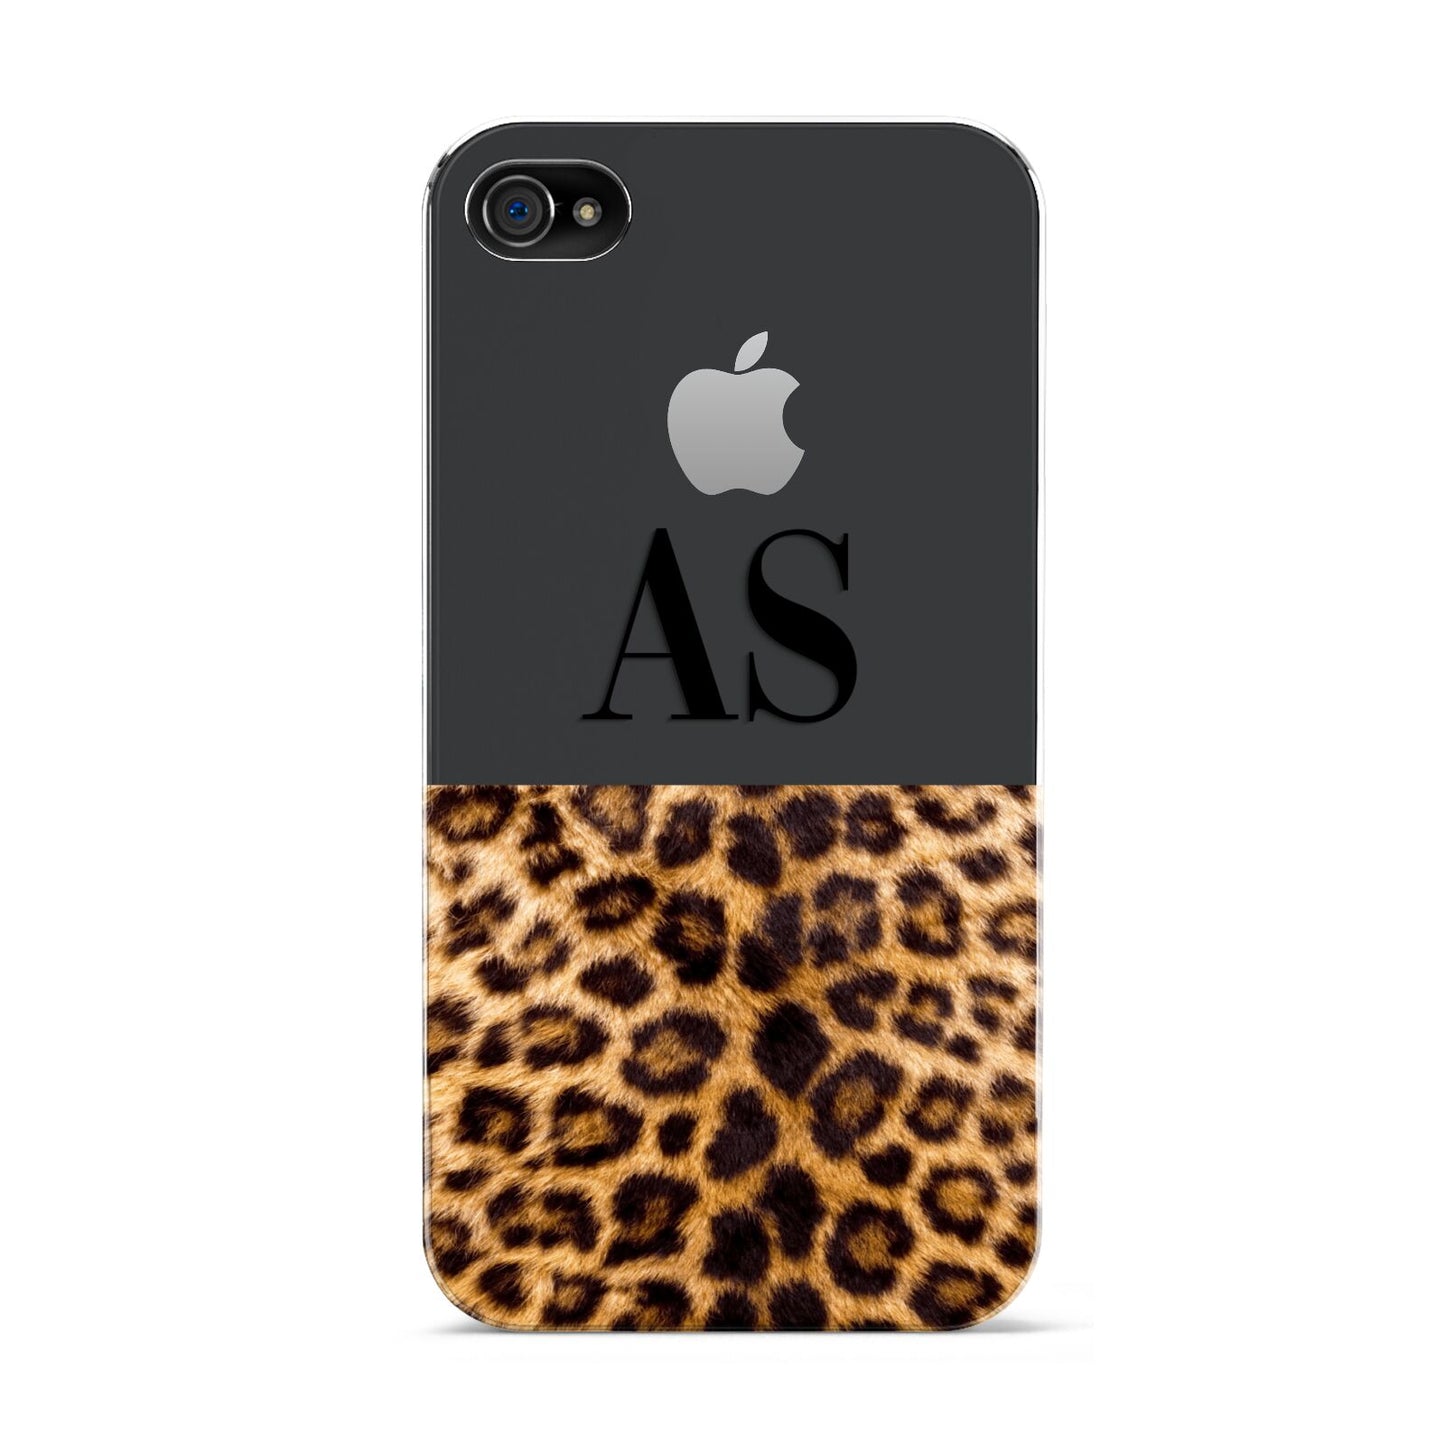 Initialled Leopard Print Apple iPhone 4s Case